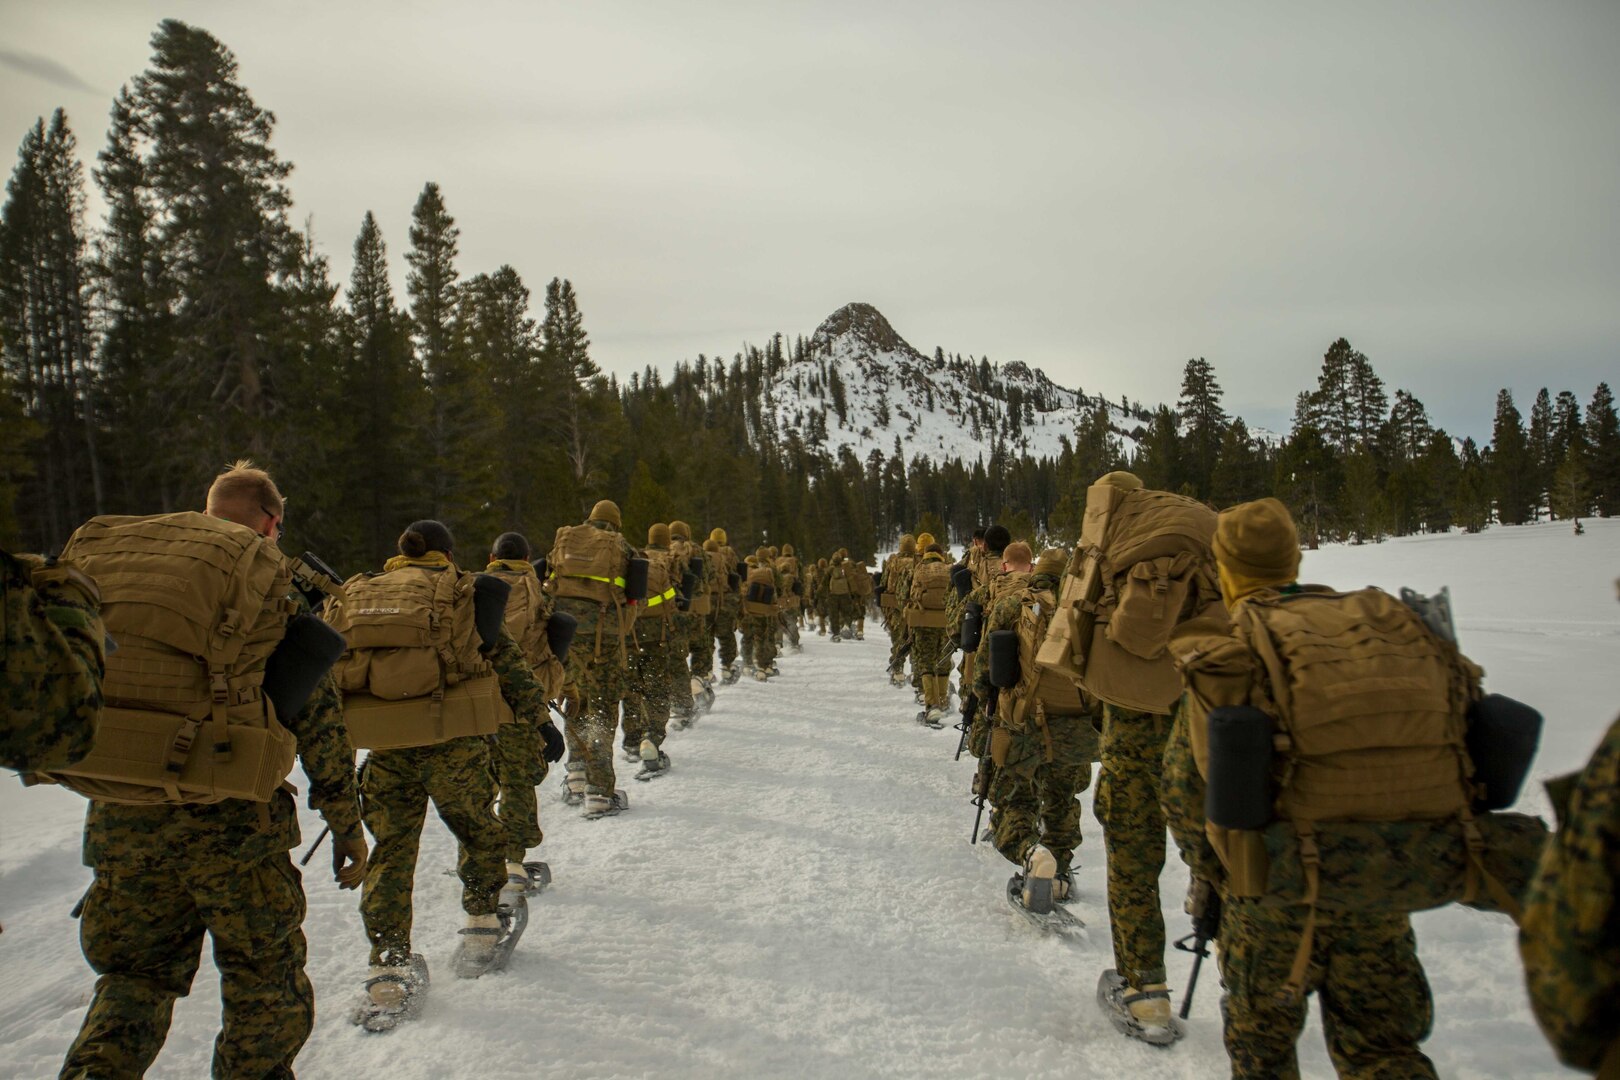 Image of Marines hiking through the snow in the mountains.